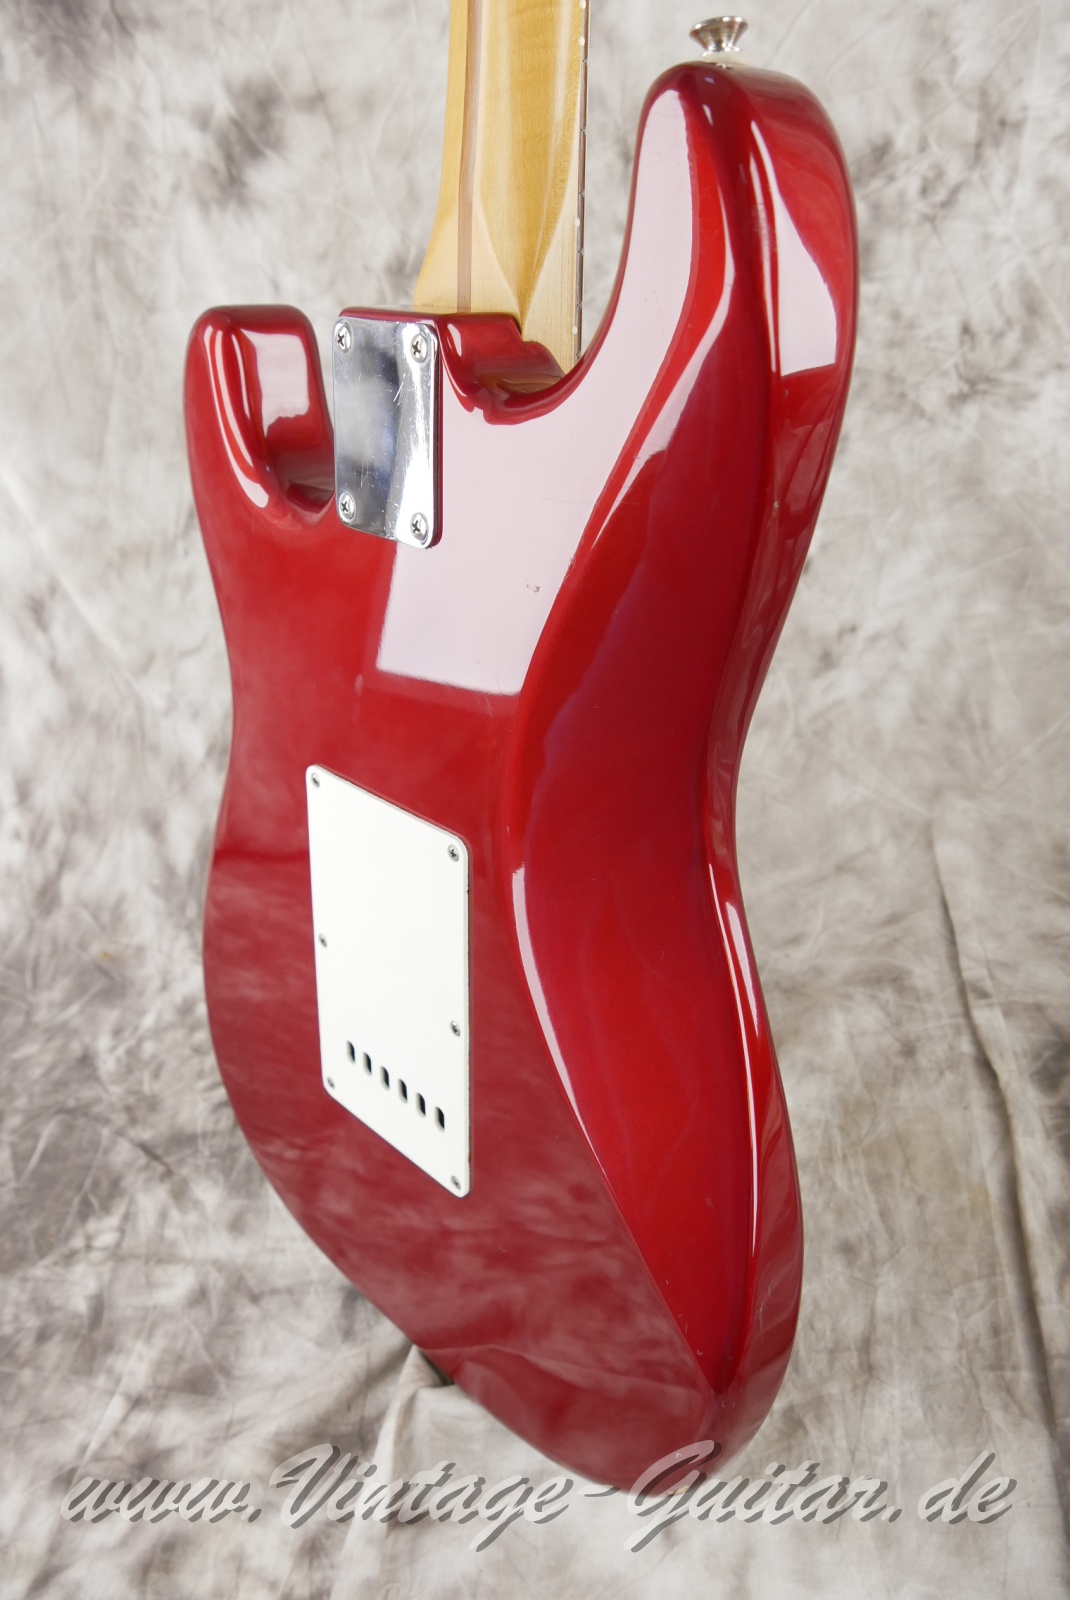 Fender_Stratocaster_Mexico_candy_apple_red_1991-012.JPG